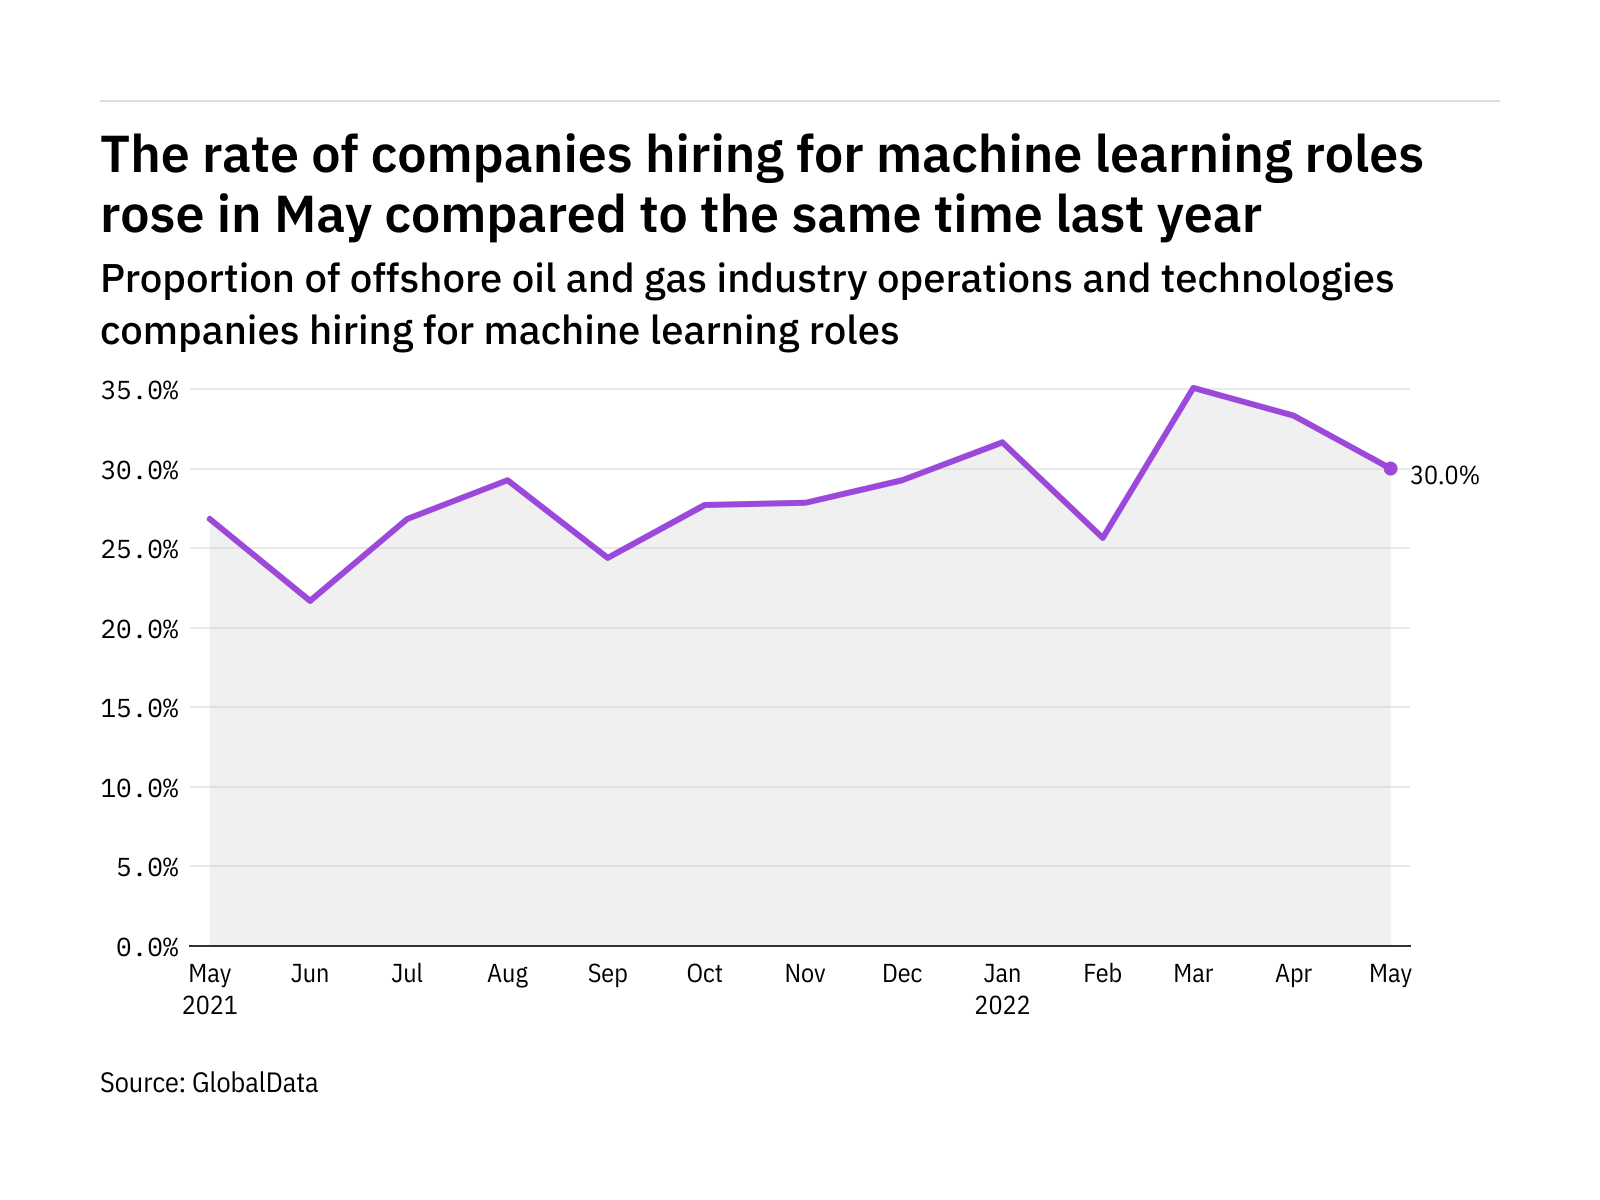 Machine learning hiring levels in the offshore industry rose in May 2022